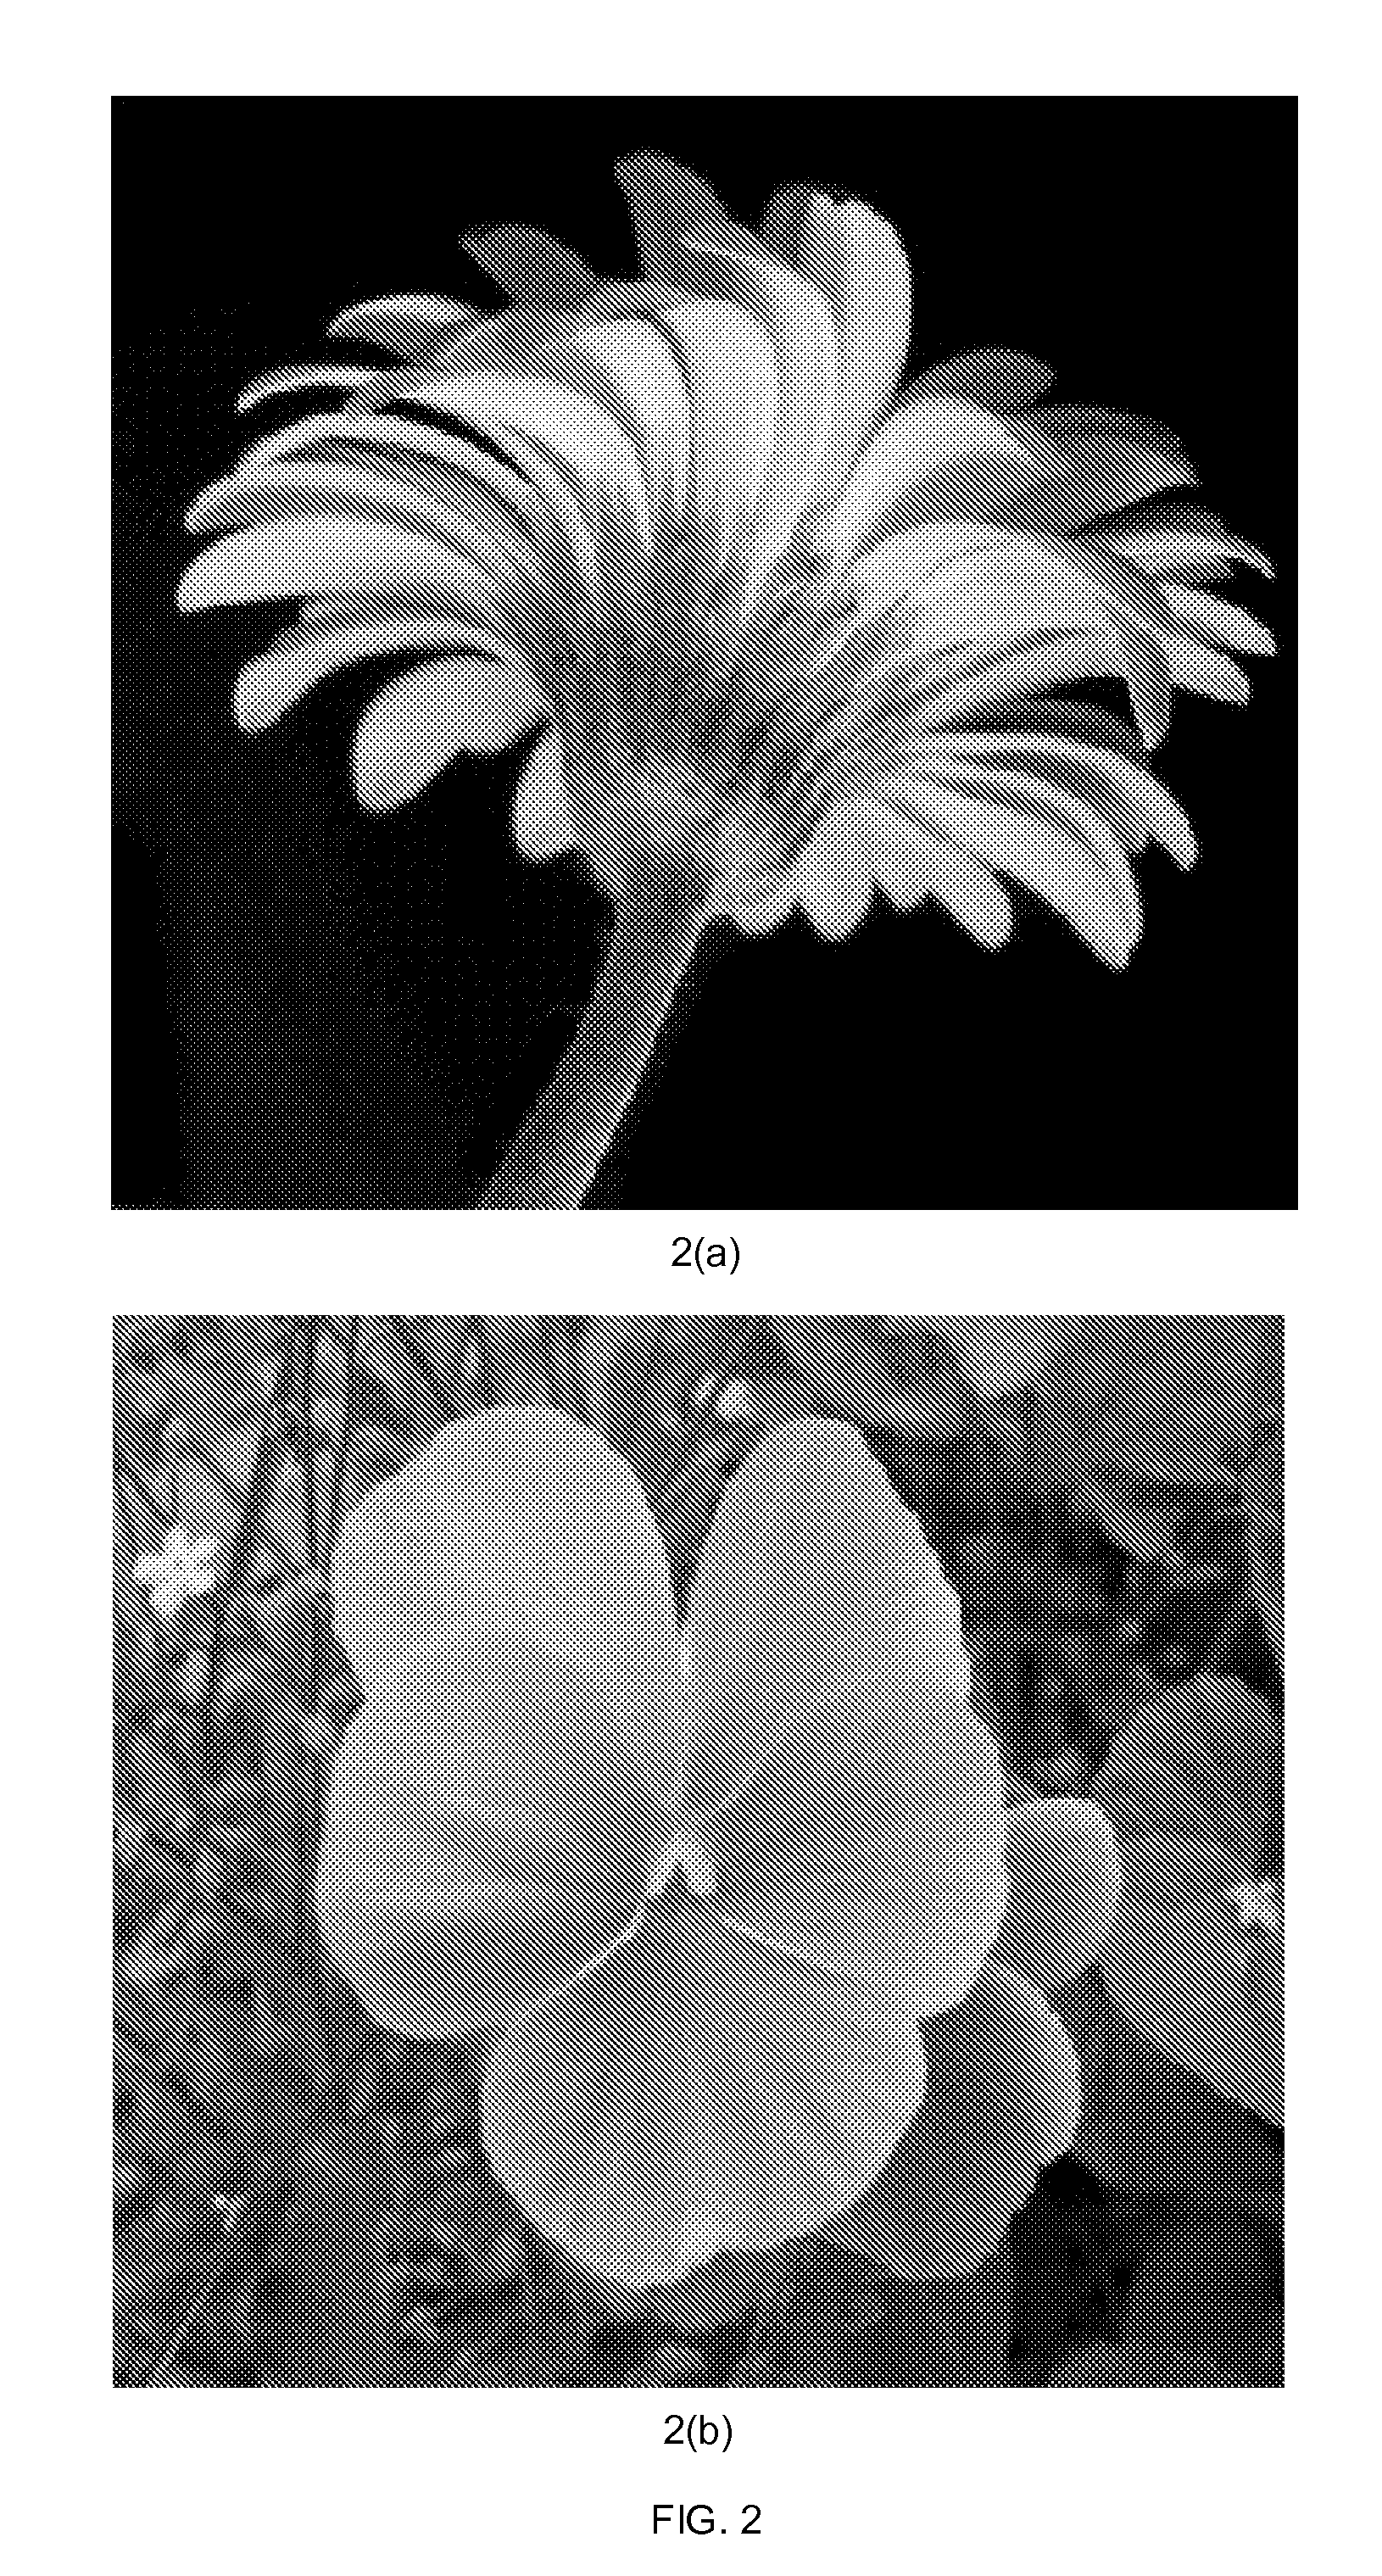 Systems and methods for unsupervised local boundary or region refinement of figure masks using over and under segmentation of regions